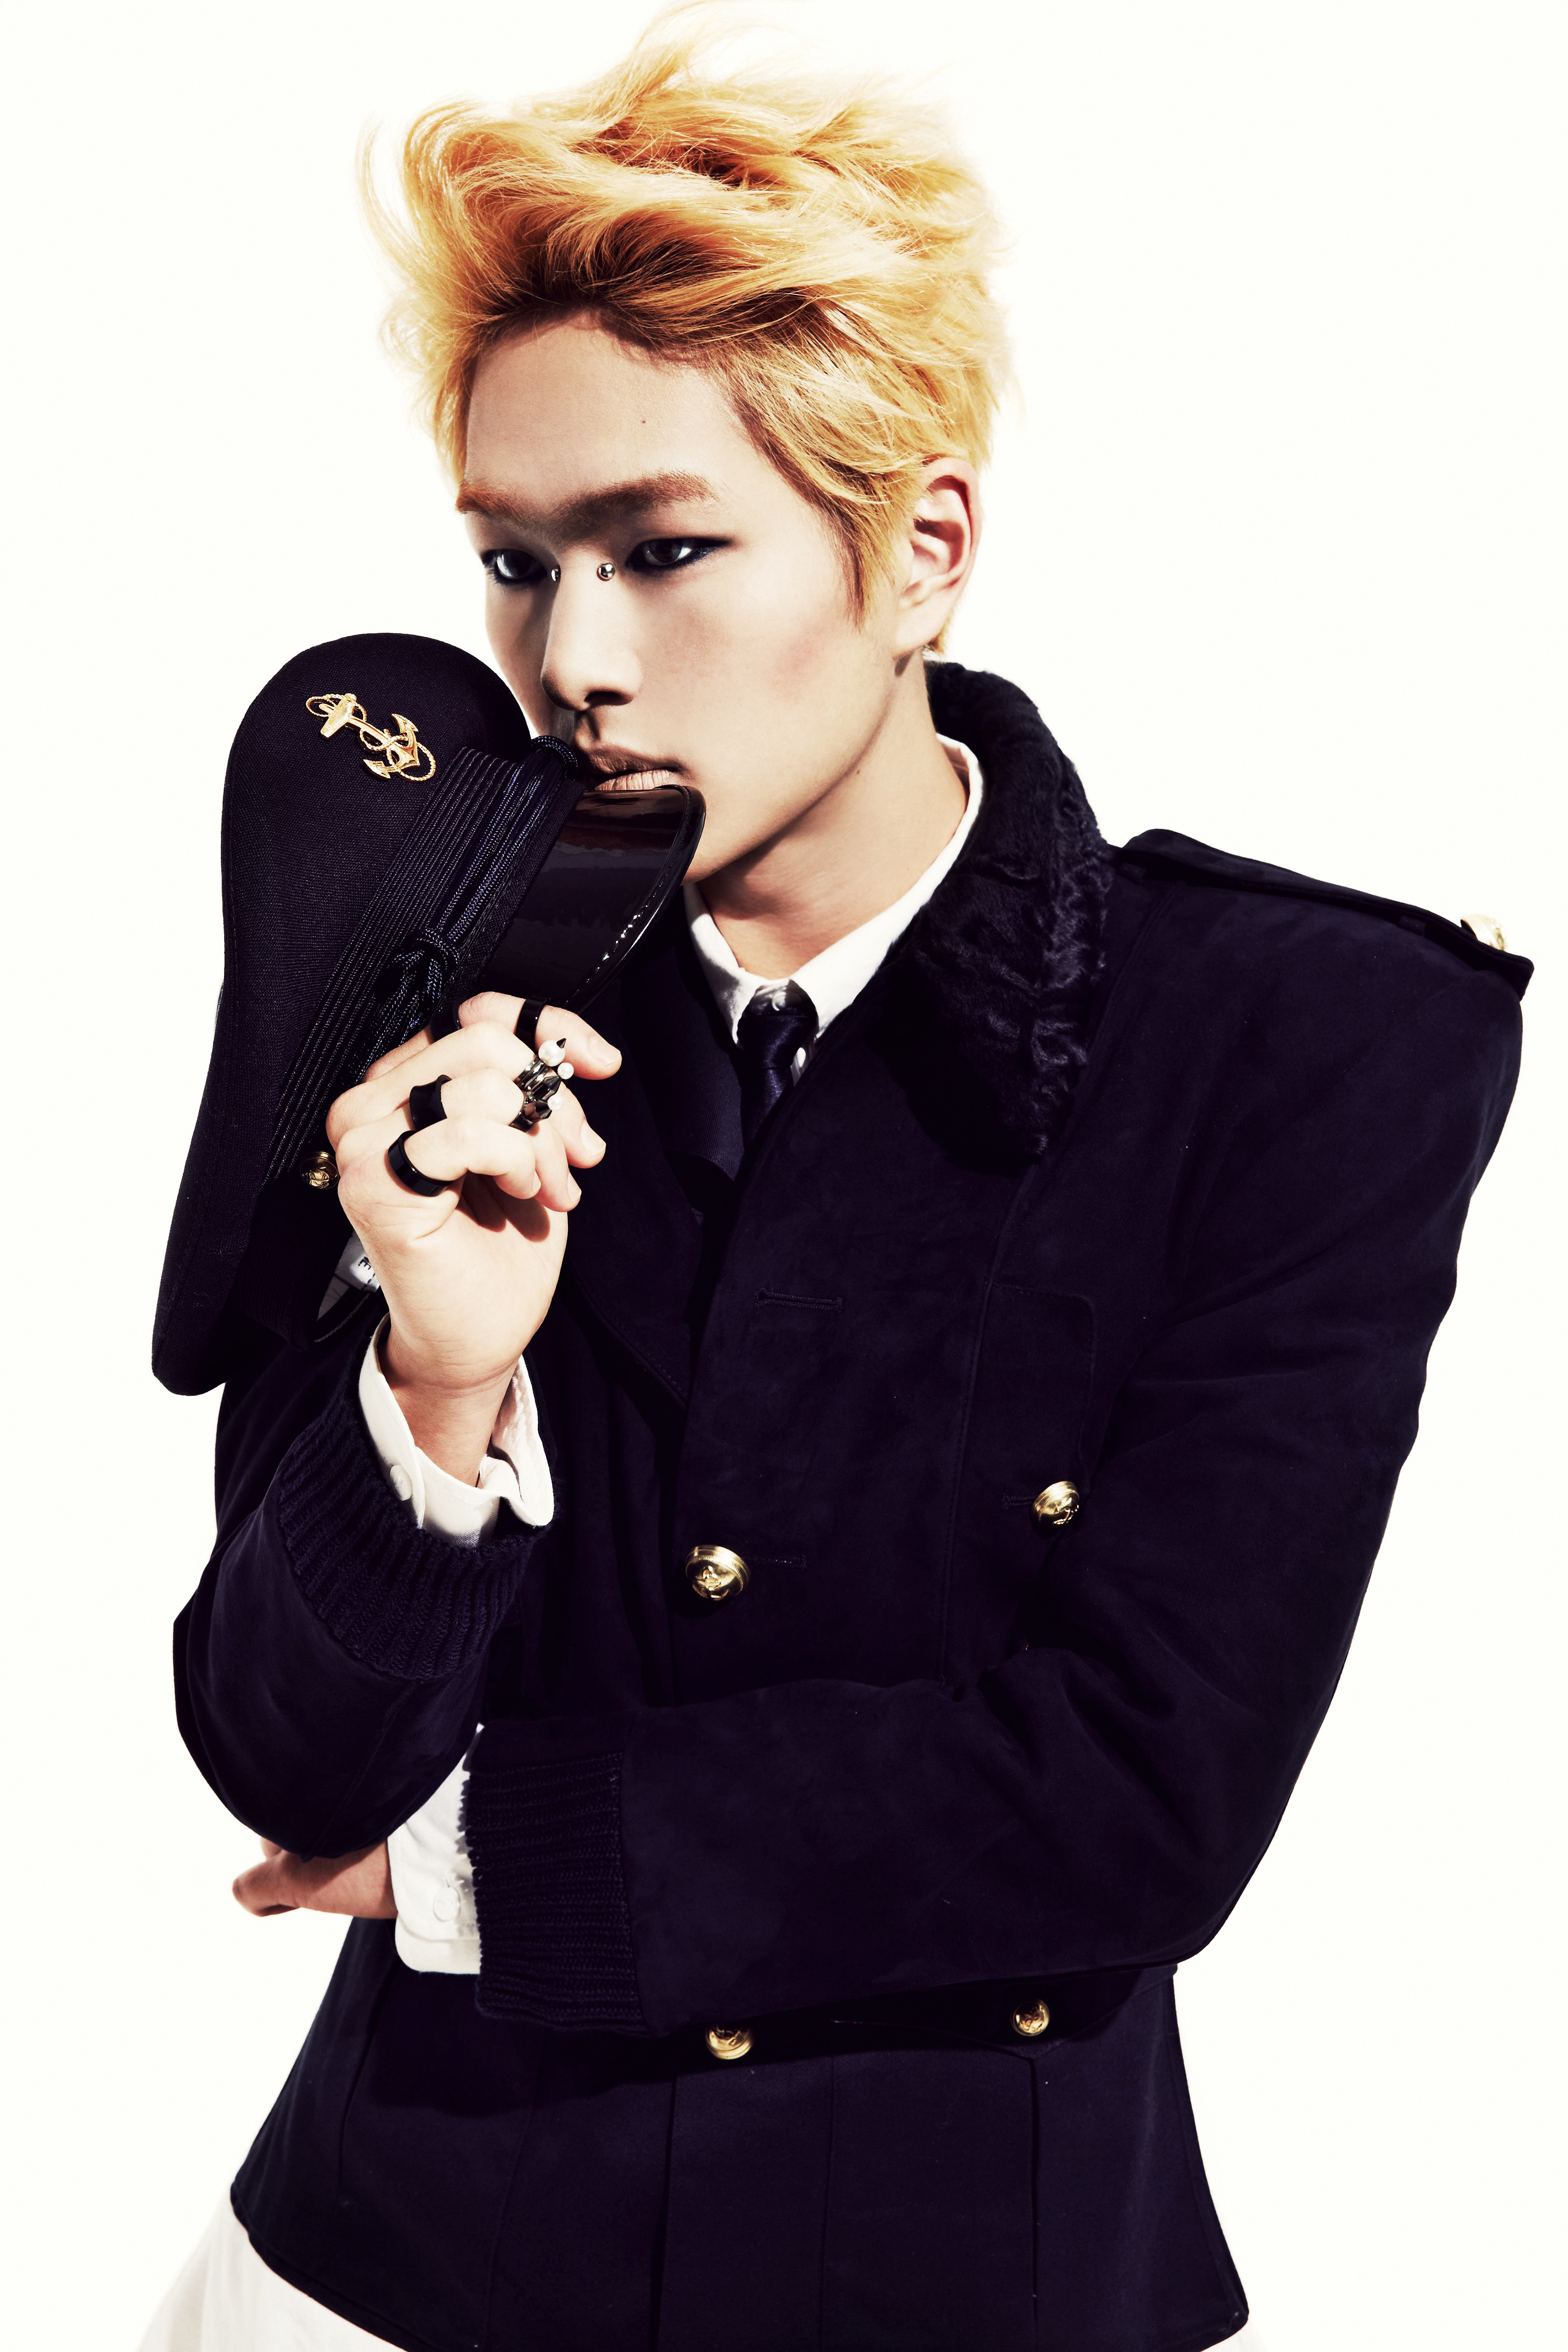  131001 SHINee @ Nueva foto teaser "Everybody" - Onew 27545140524A1D9F162F22